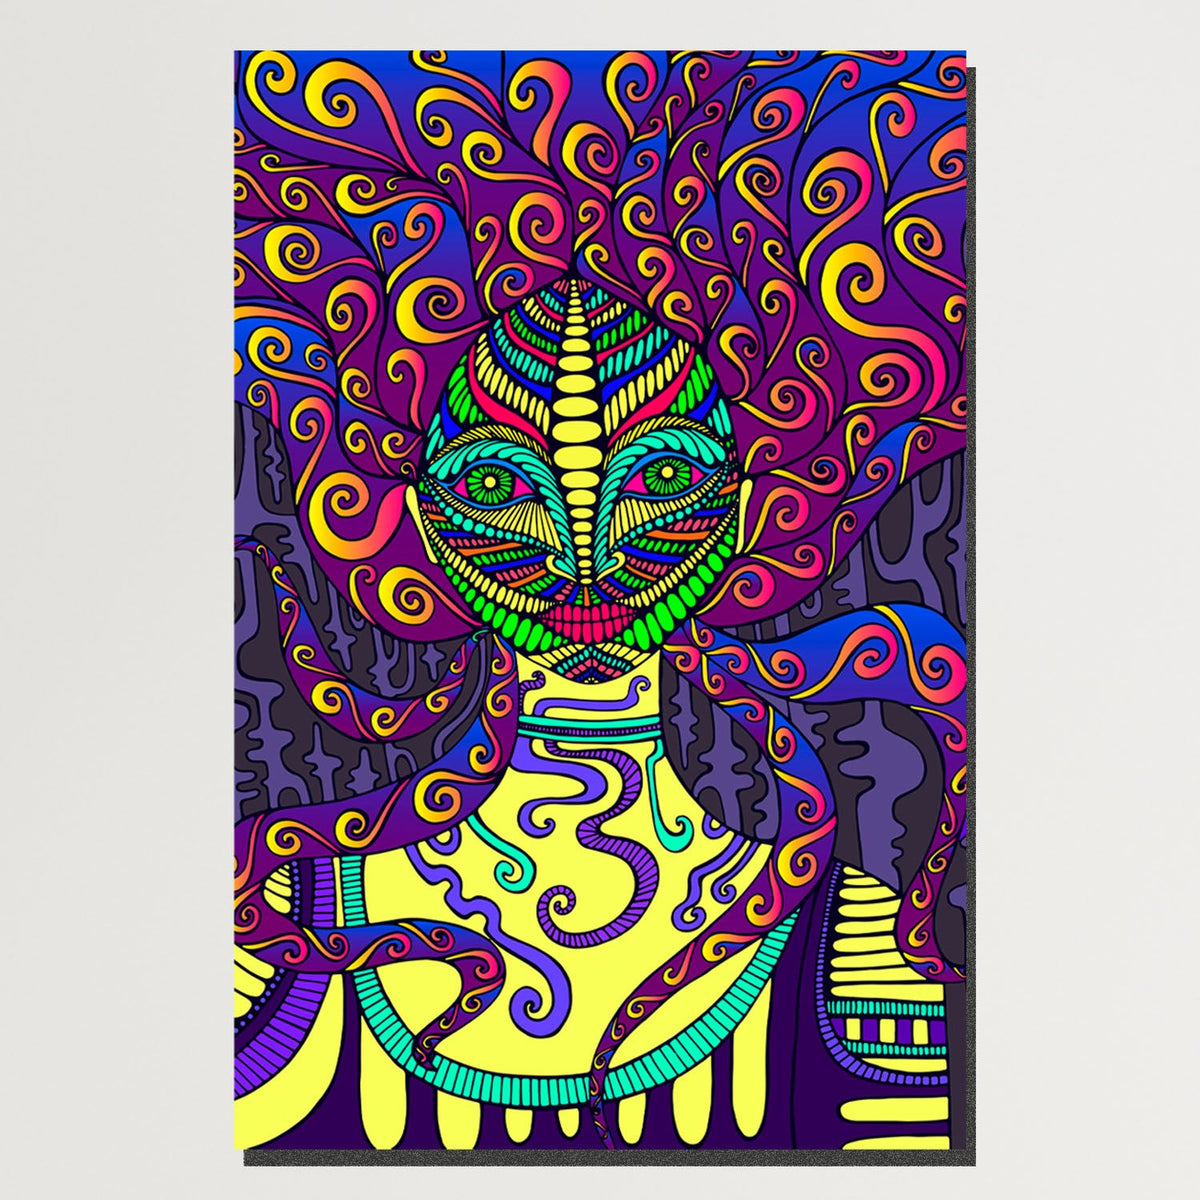 https://cdn.shopify.com/s/files/1/0387/9986/8044/products/PsychedelicWomanCanvasArtprintStretched-Plain.jpg